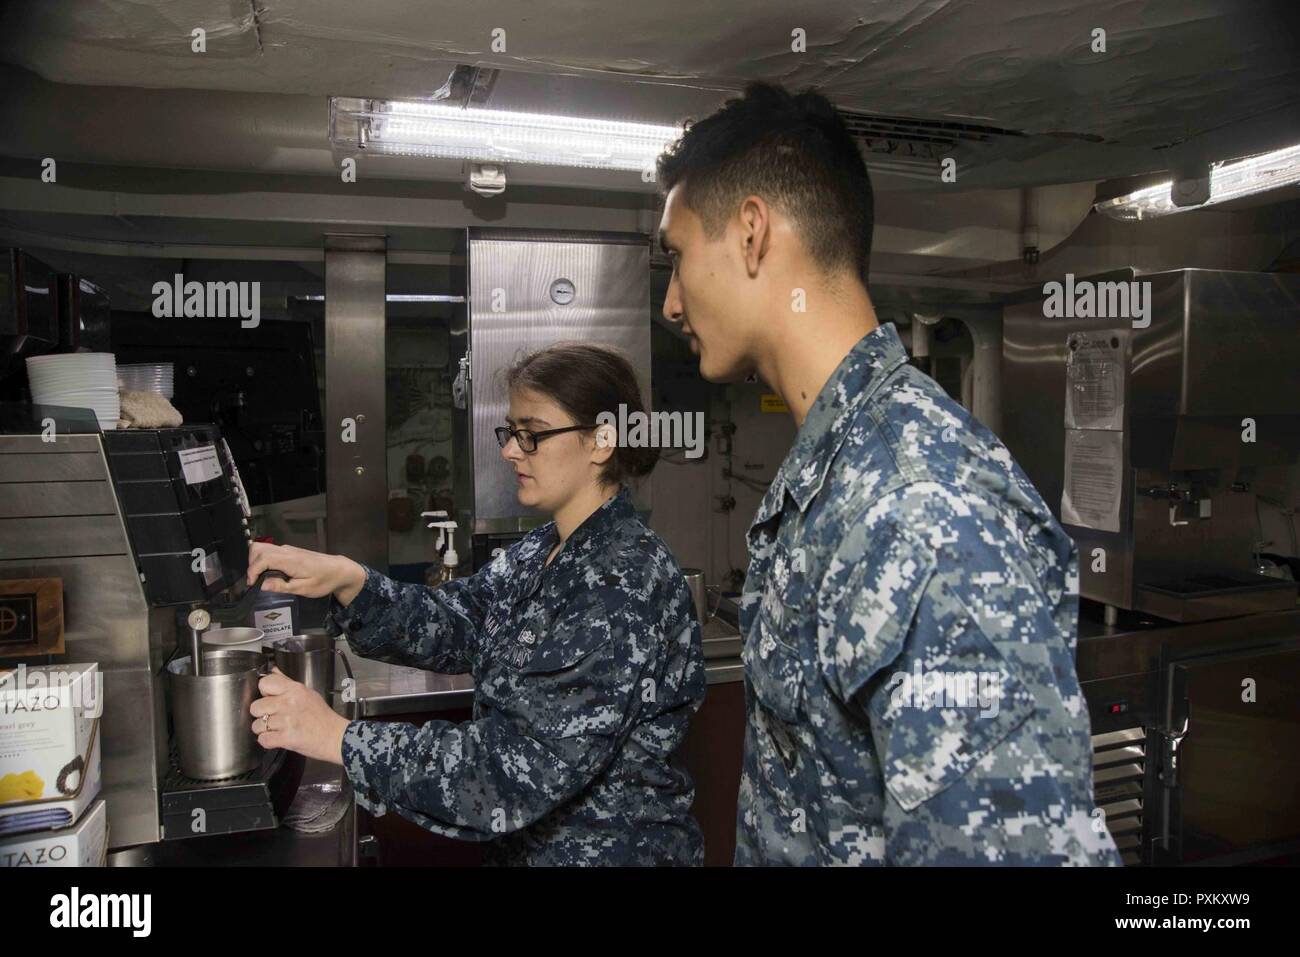 NORFOLK, Va. (June 8, 2017) Ship's Serviceman Seaman Brianna Whitman, left, from Kingsford, Mich., teaches Gunner's Mate 3rd Class Adrian Mora, from Modesto, Calif., how to make coffee in the coffeehouse aboard the aircraft carrier USS Dwight D. Eisenhower (CVN 69) (Ike). Ike is pier side during the sustainment phase of the Optimized Fleet Response Plan (OFRP). Stock Photo